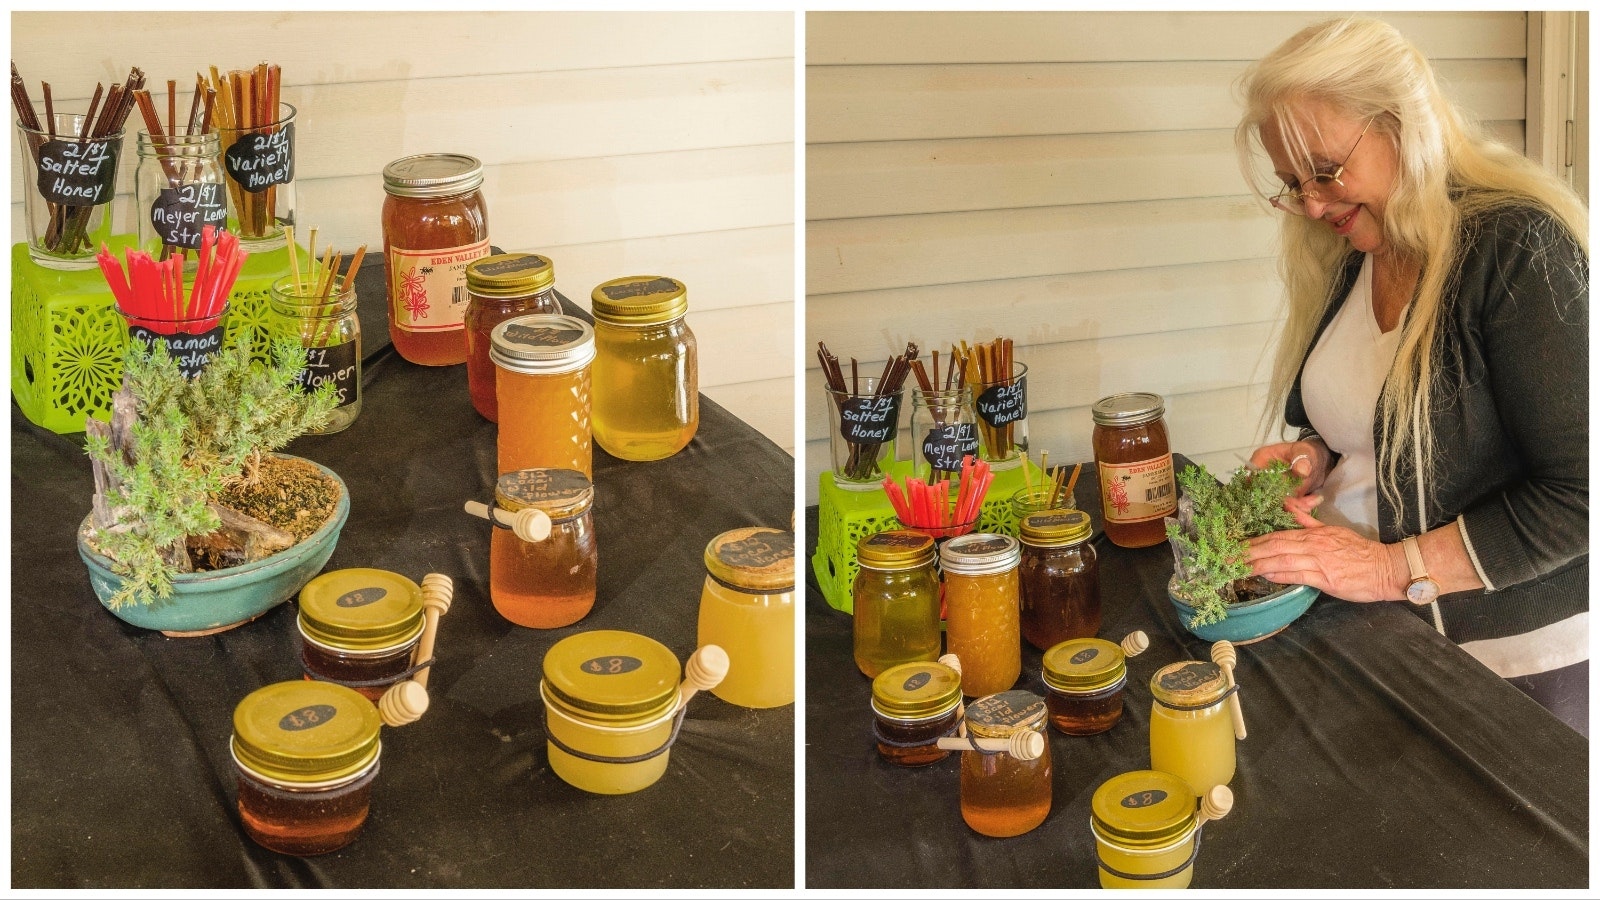 There's a unique zen found in creating beautiful bonsais and pure Wyoming honey.